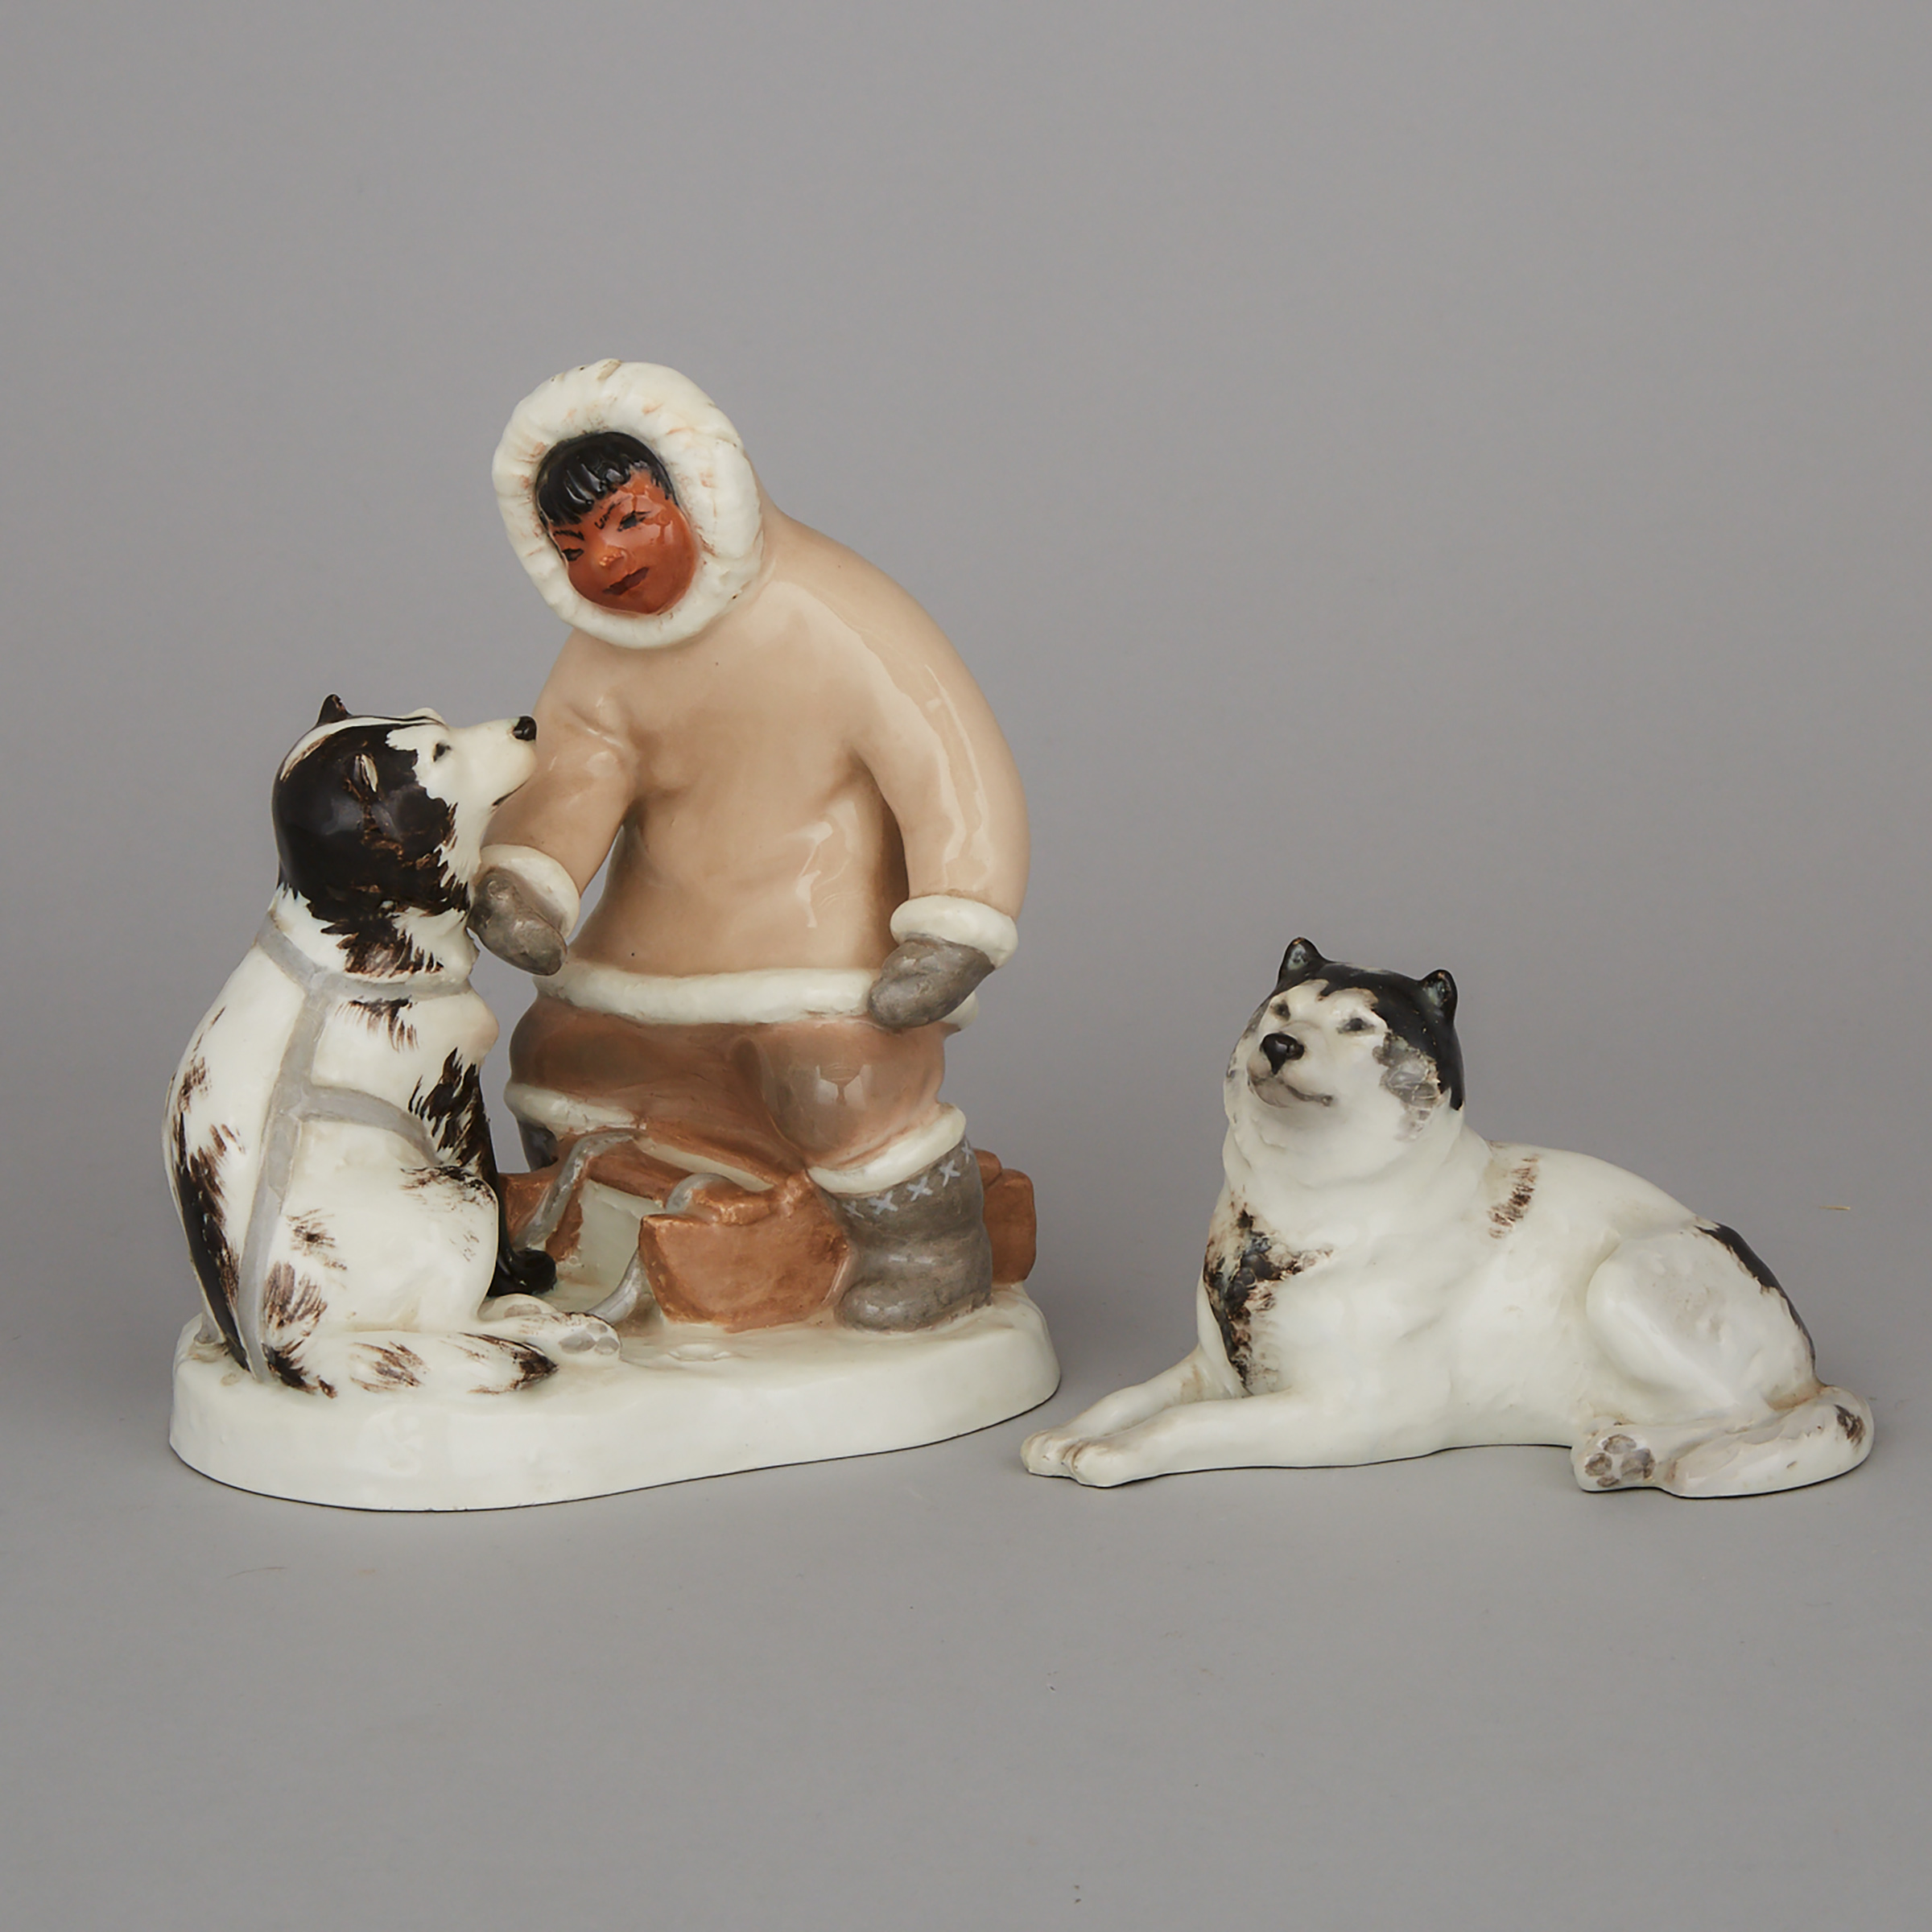 Leo Mol Porcelain Figure Group of an Inuk Boy with Sled and Dogs, 1954